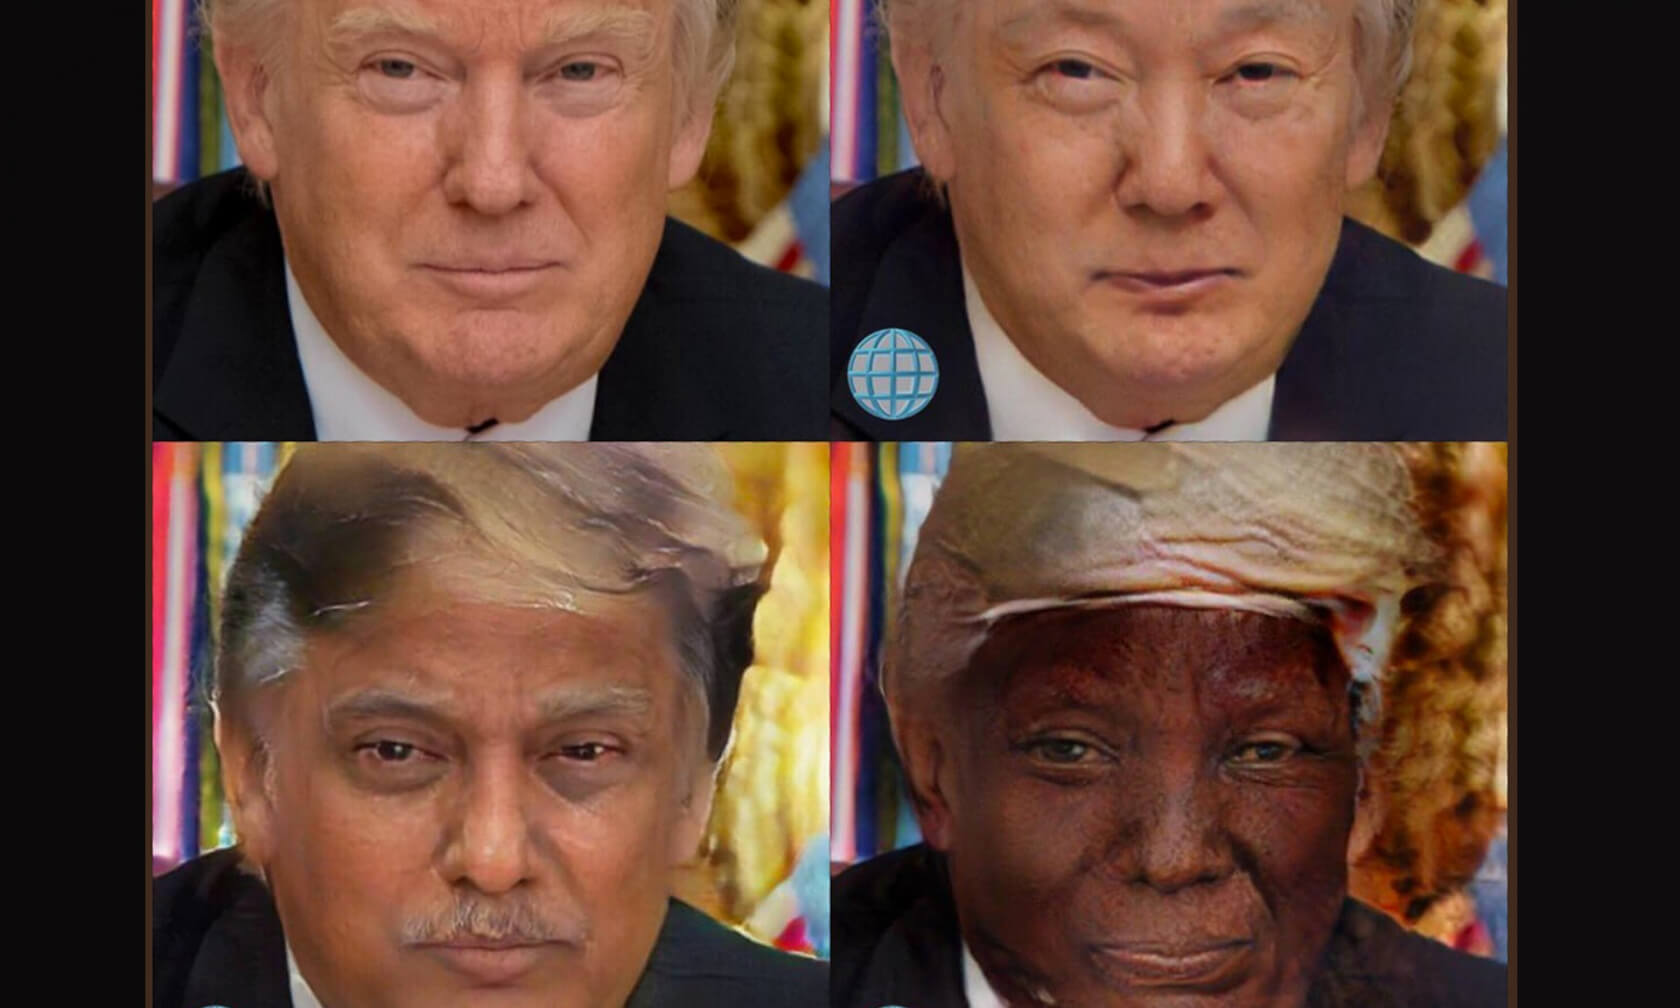 FaceApp deletes ethnicity filters following racism accusations